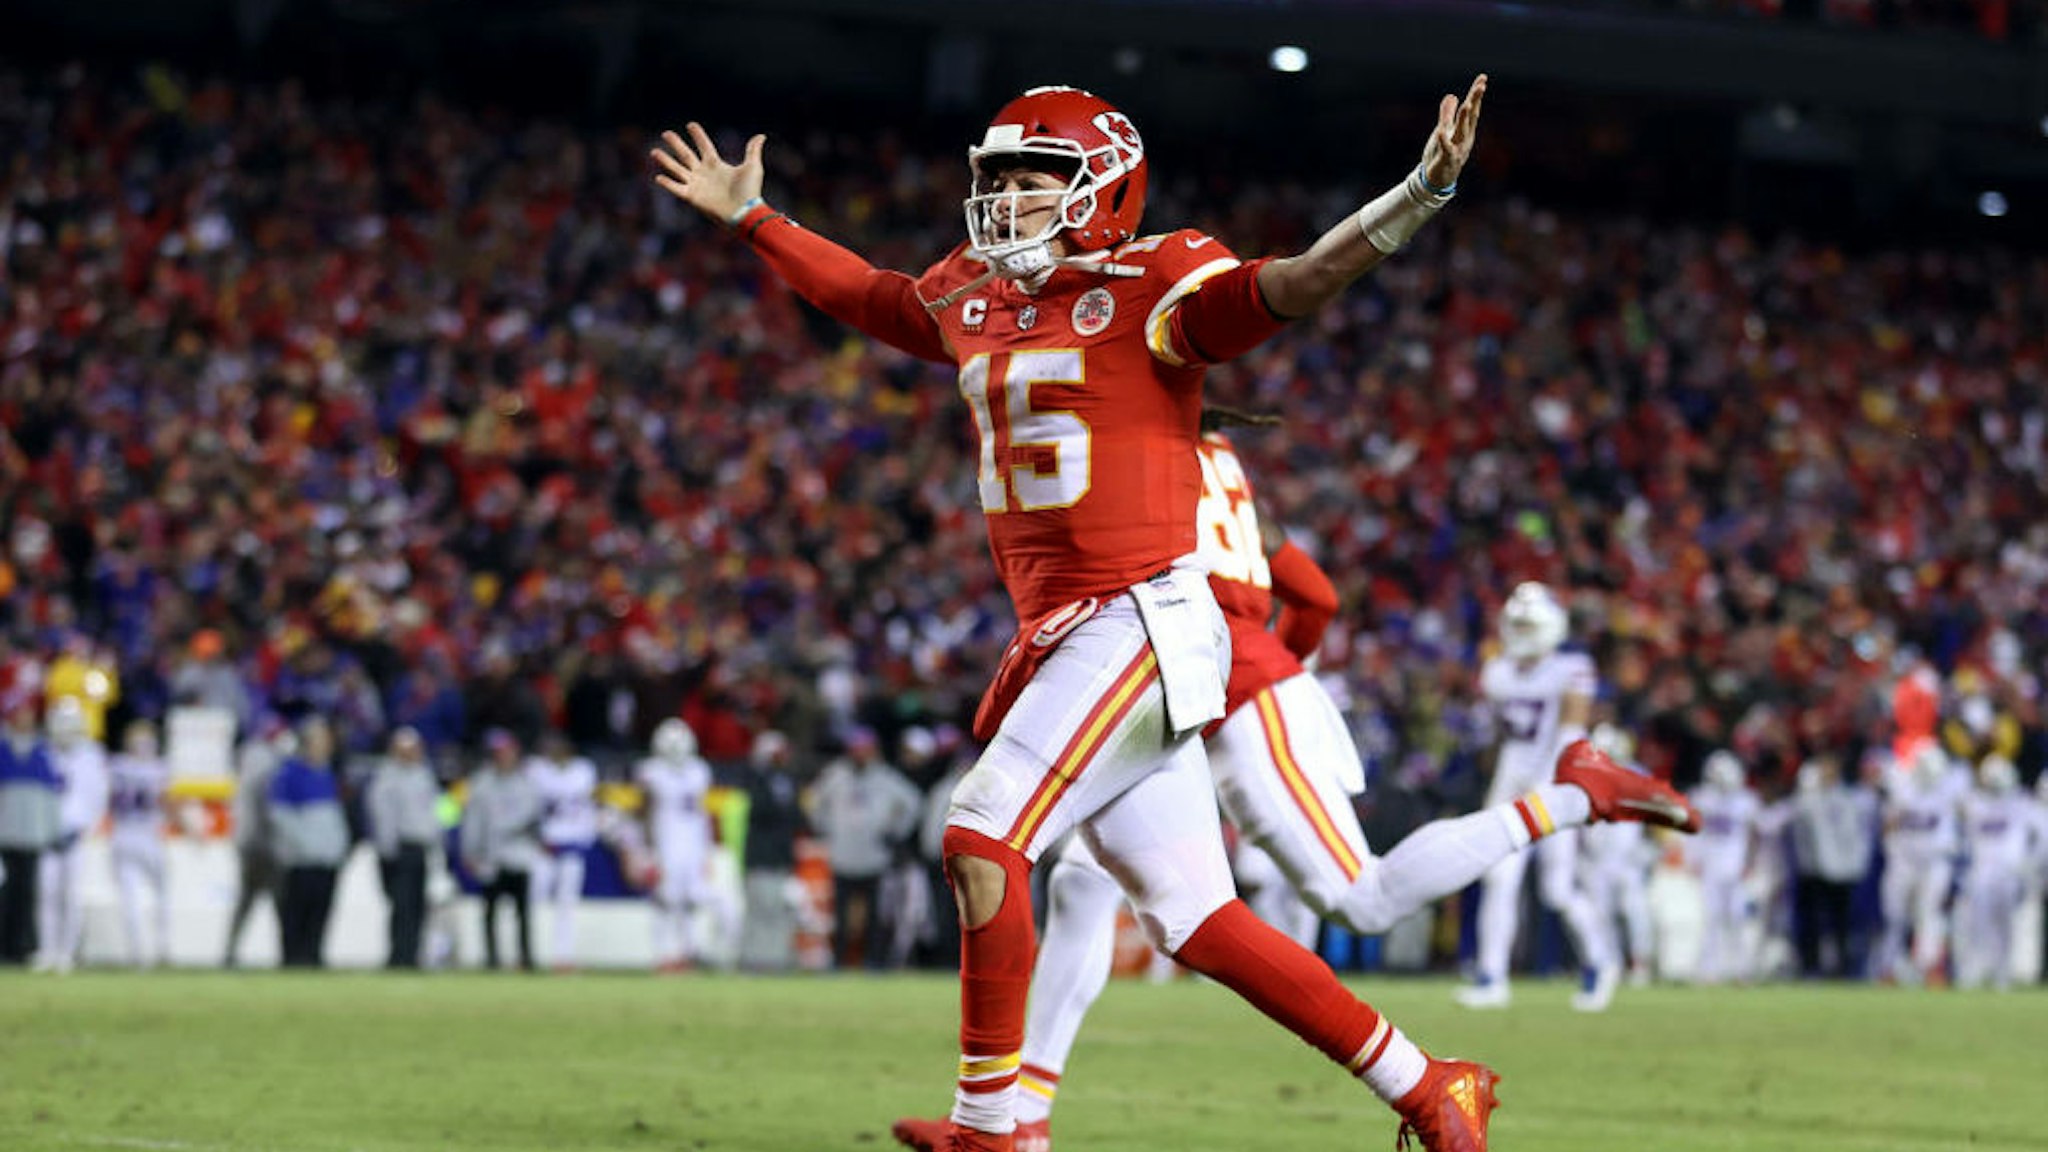 KANSAS CITY, MISSOURI - JANUARY 23: Patrick Mahomes #15 of the Kansas City Chiefs celebrates a touchdown scored by Tyreek Hill #10 against the Buffalo Bills during the fourth quarter in the AFC Divisional Playoff game at Arrowhead Stadium on January 23, 2022 in Kansas City, Missouri. (Photo by Jamie Squire/Getty Images)